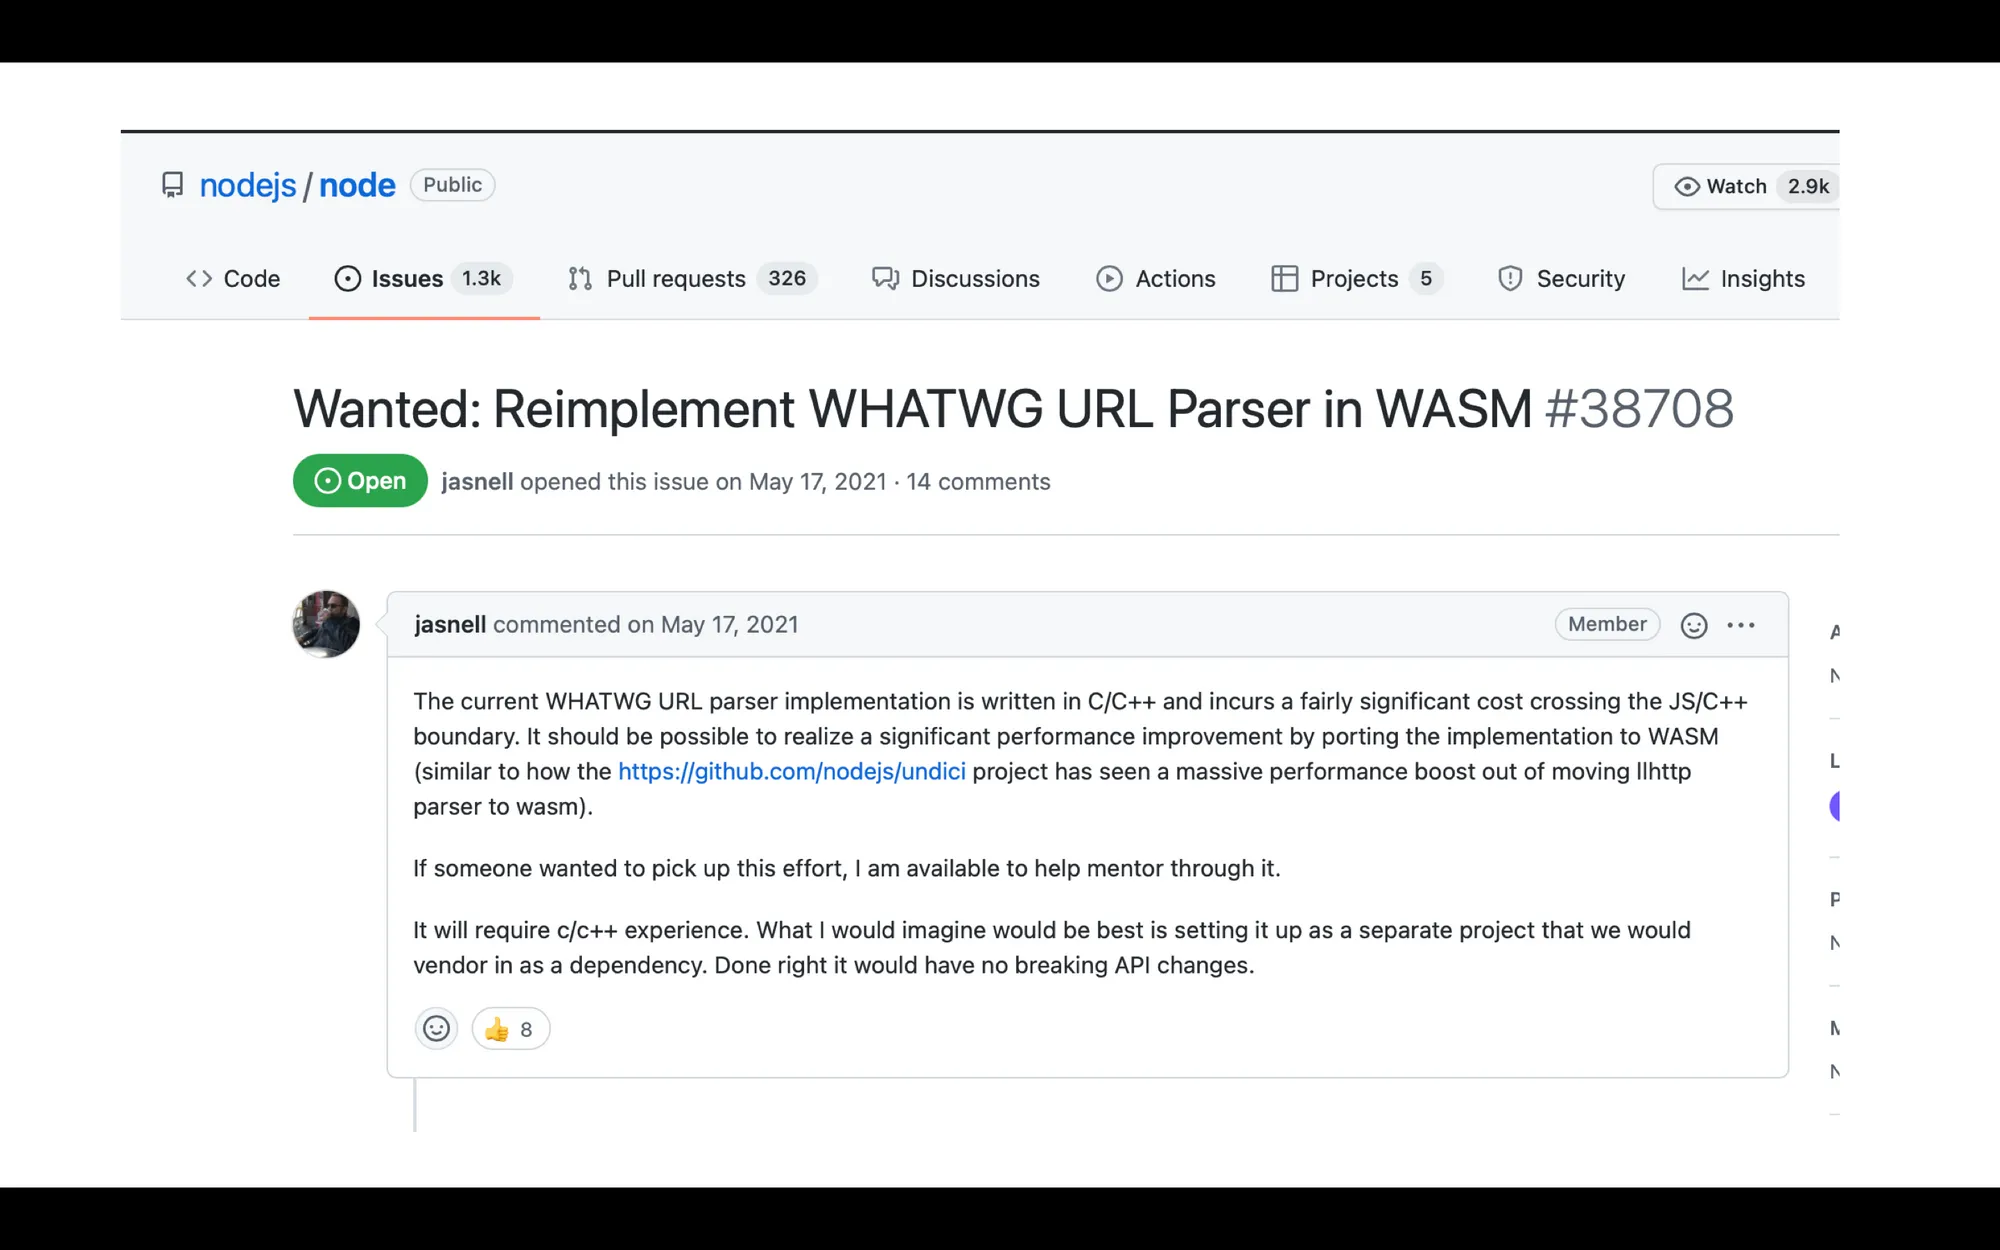 Wanted: Reimplement WHATWG URL Parser in WASM